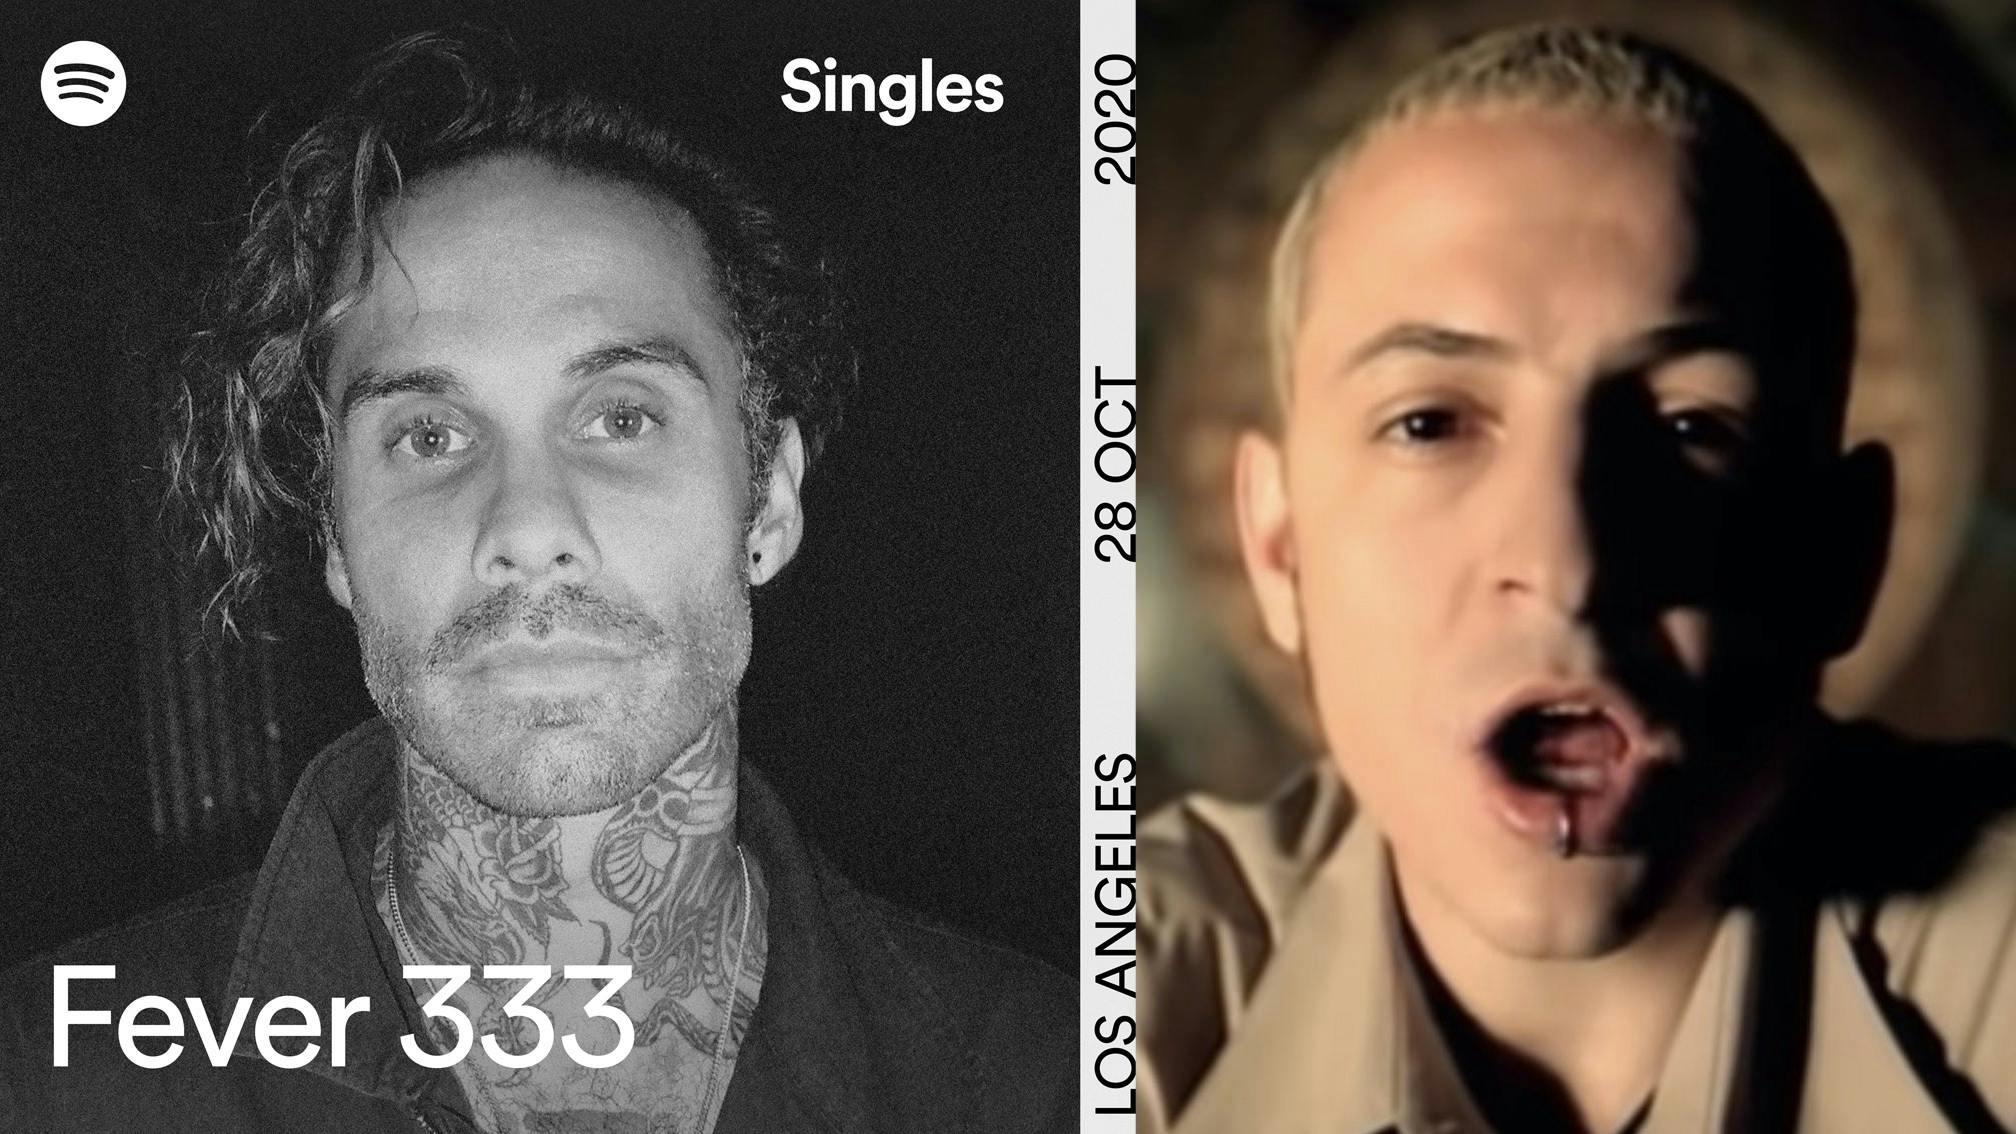 FEVER 333 Share Awesome Cover Of Linkin Park's In The End